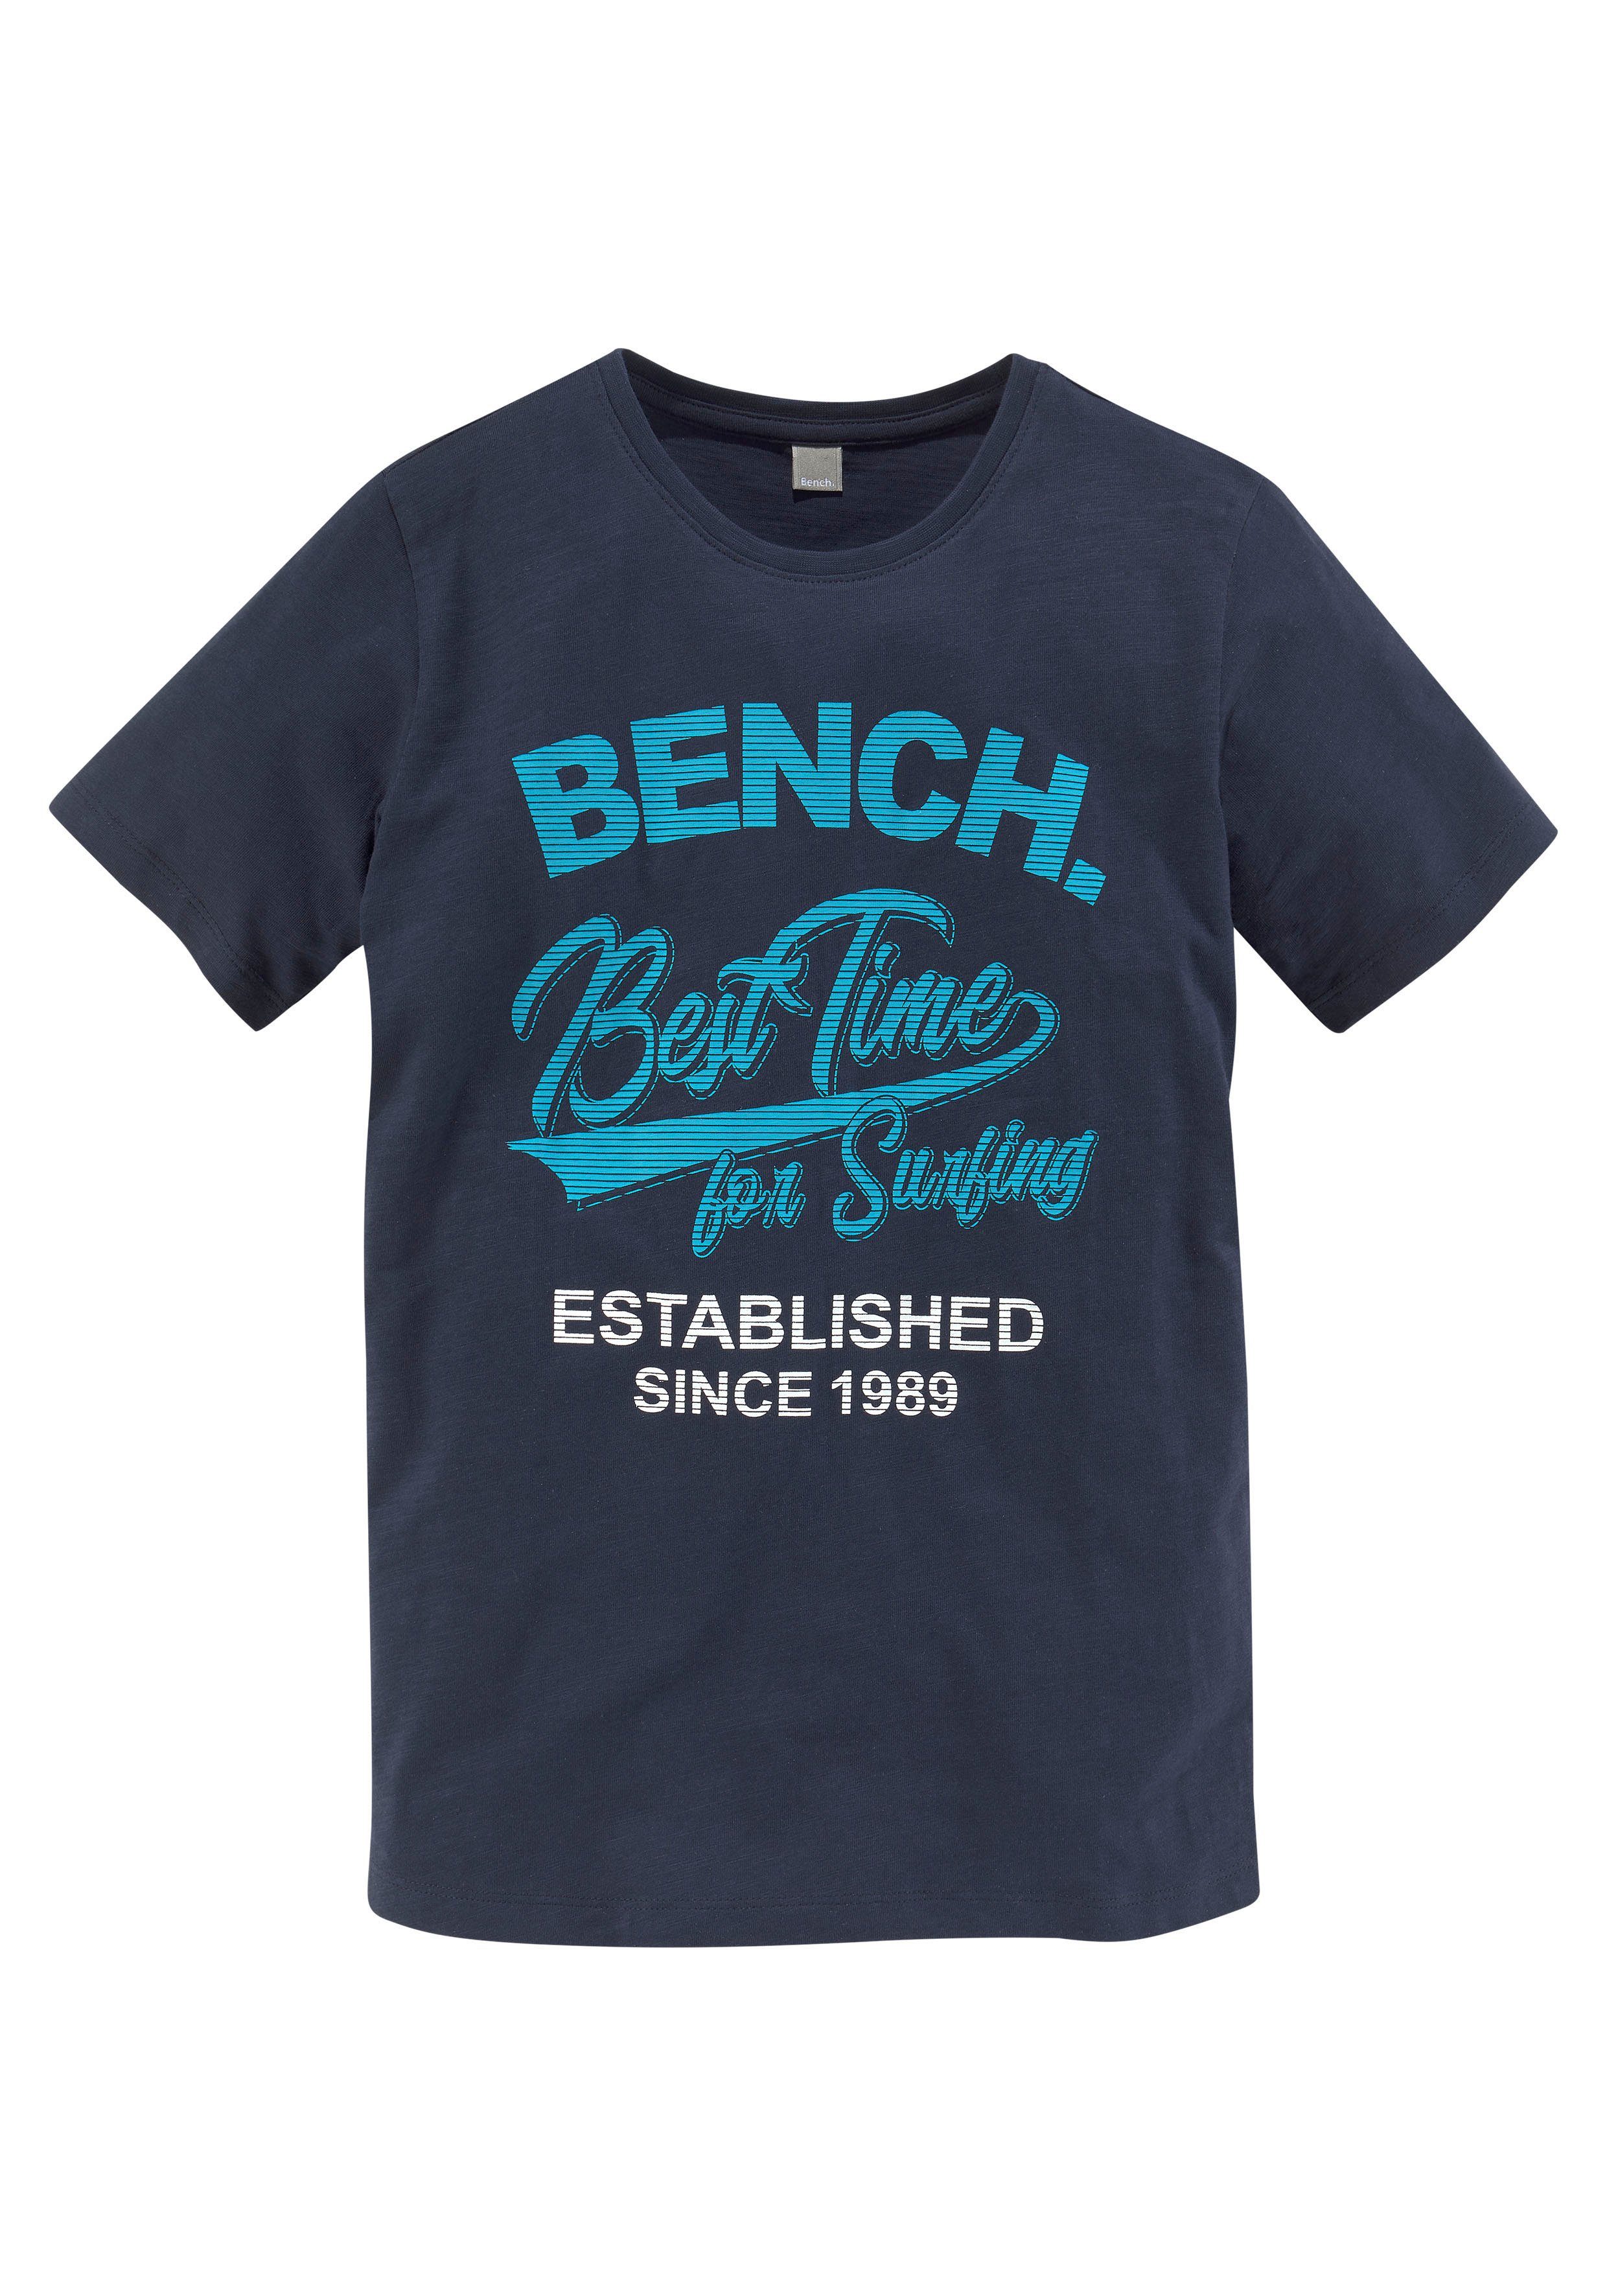 T-Shirt surfing Best Bench. for time